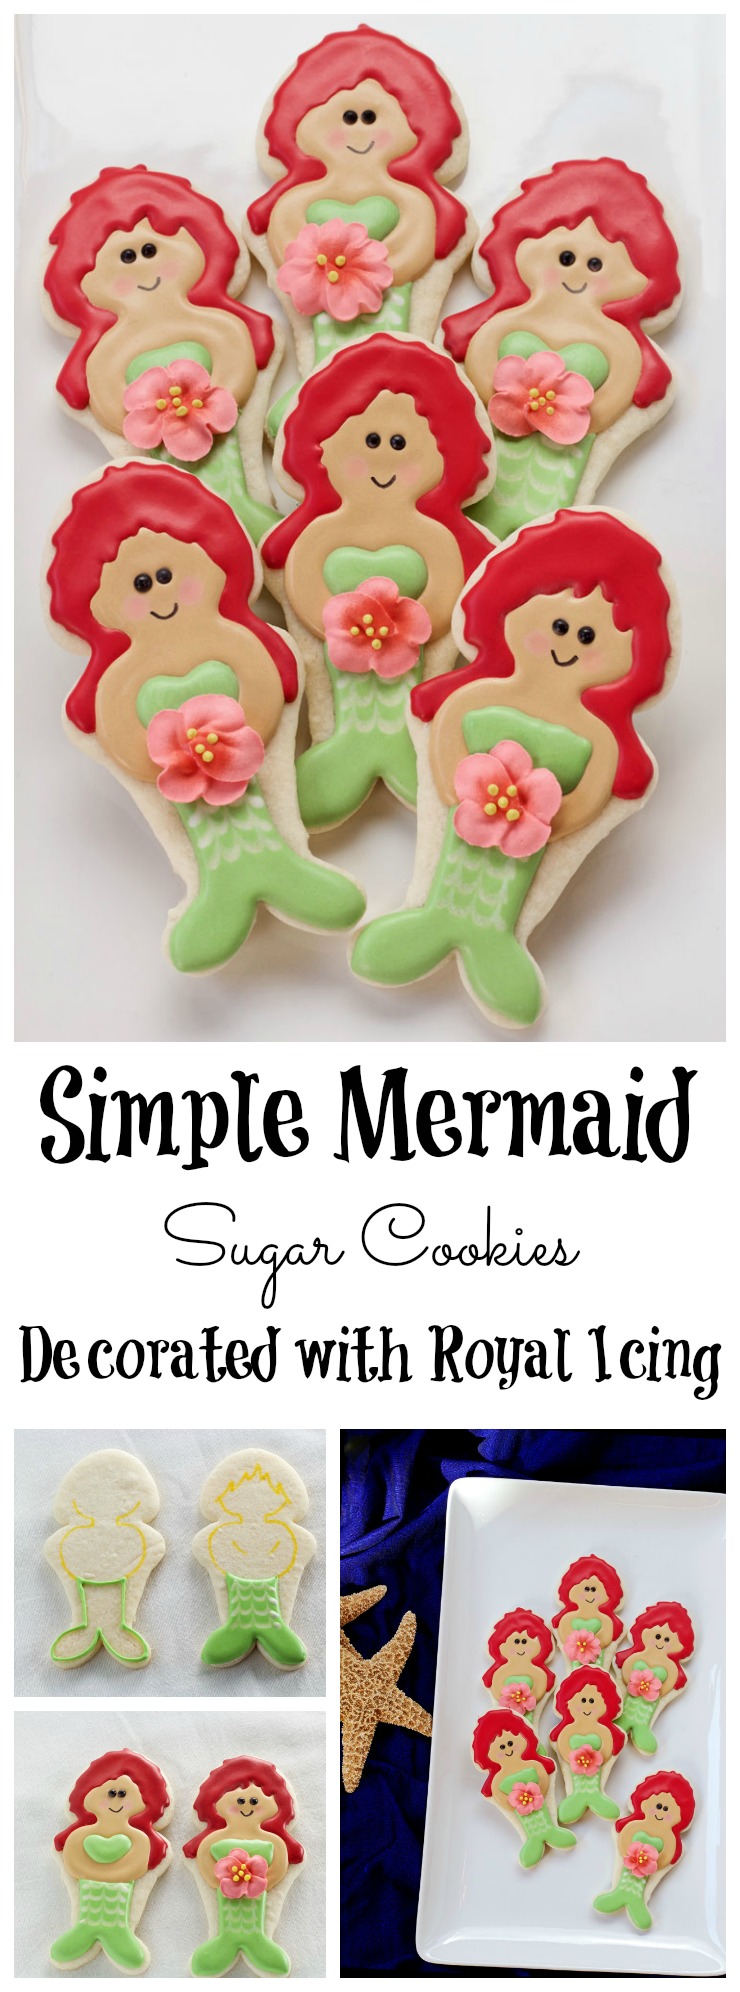 How to Make these Happy Little Mermaid Cookies - Sugar Cookies Decorated with Royal Icing via www.thebearfootbaker.com